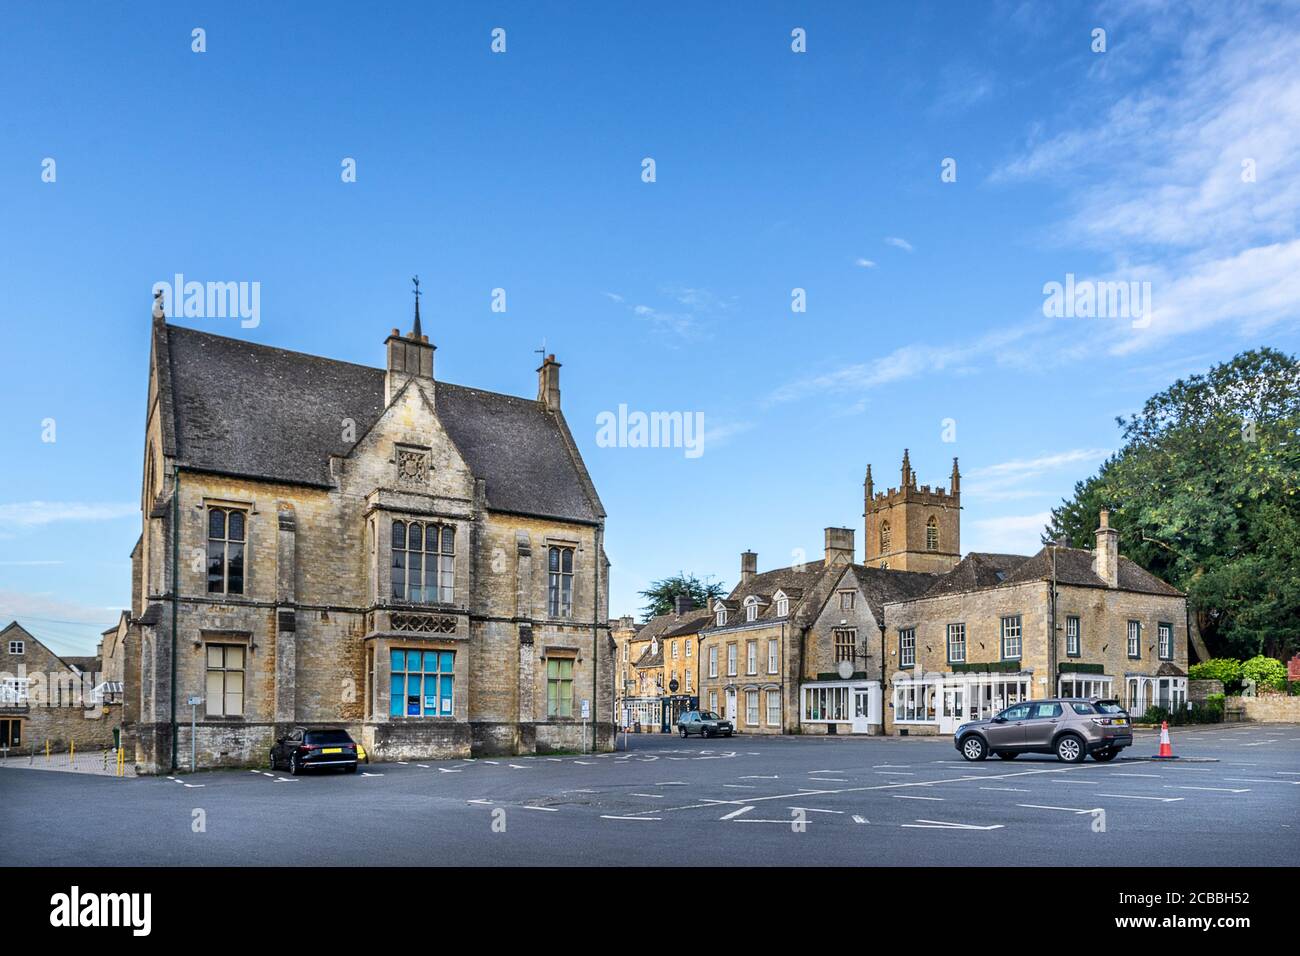 The Cotswold town of Stow on the Wold Stock Photo